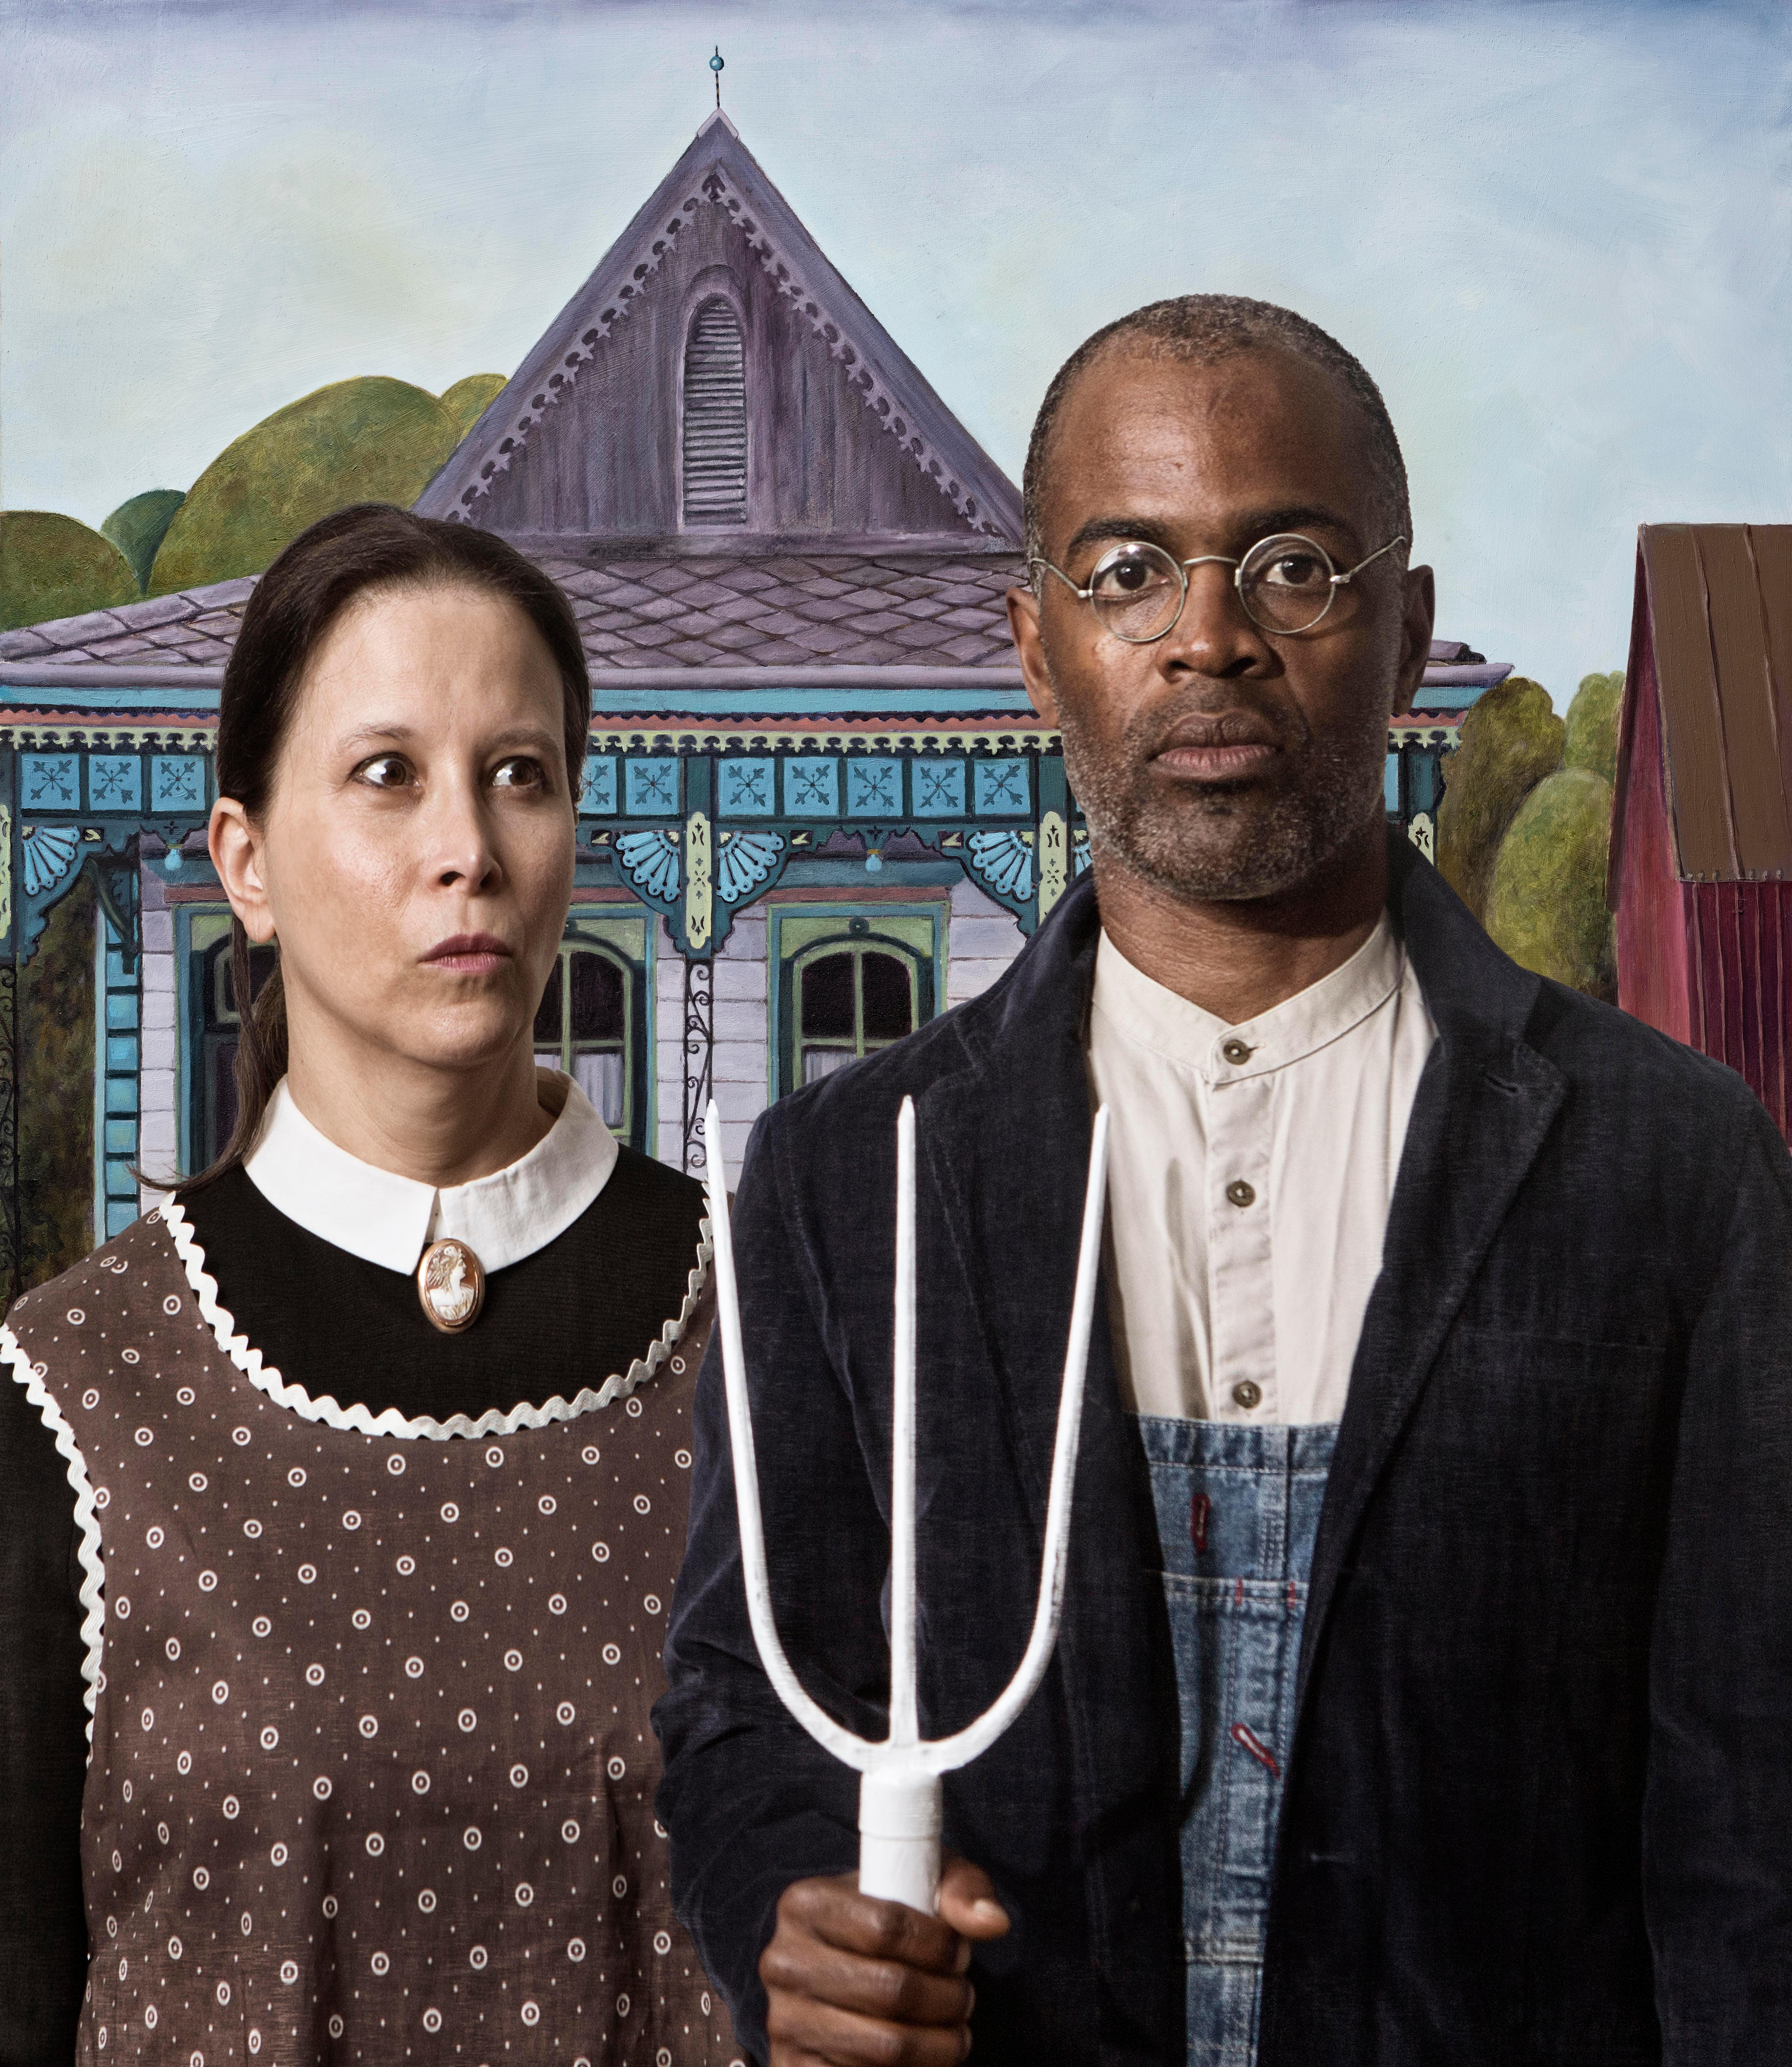 E2 - Kleinveld & Julien Portrait Photograph - Ode to Grant Wood's American Gothic